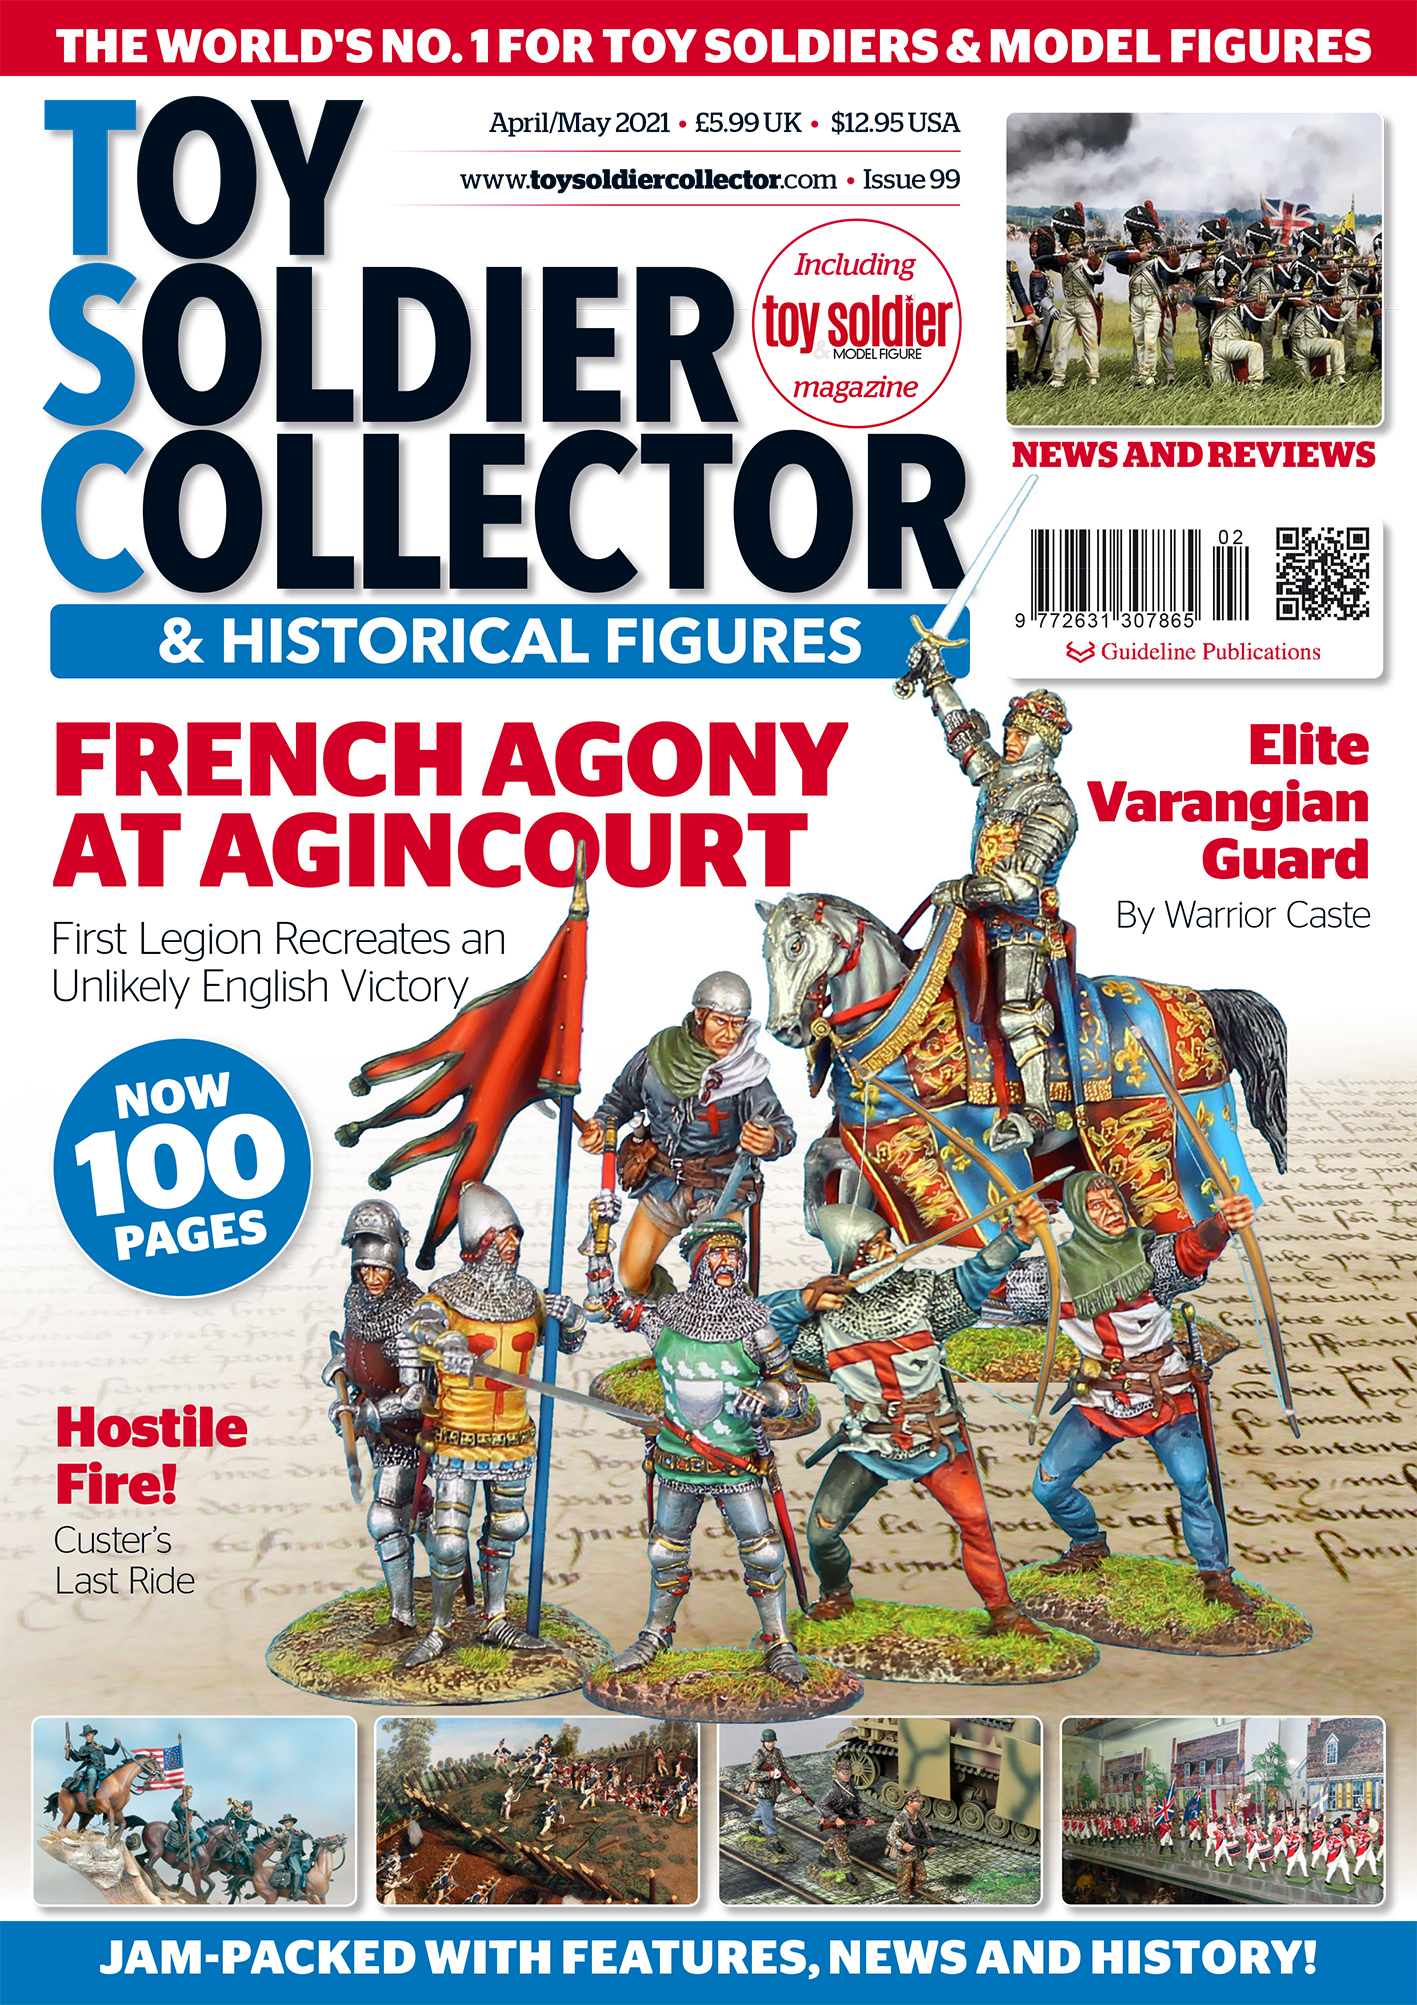 Guideline Publications Ltd Toy Soldier Collector #99 Apr/May 21 - Issue 99 